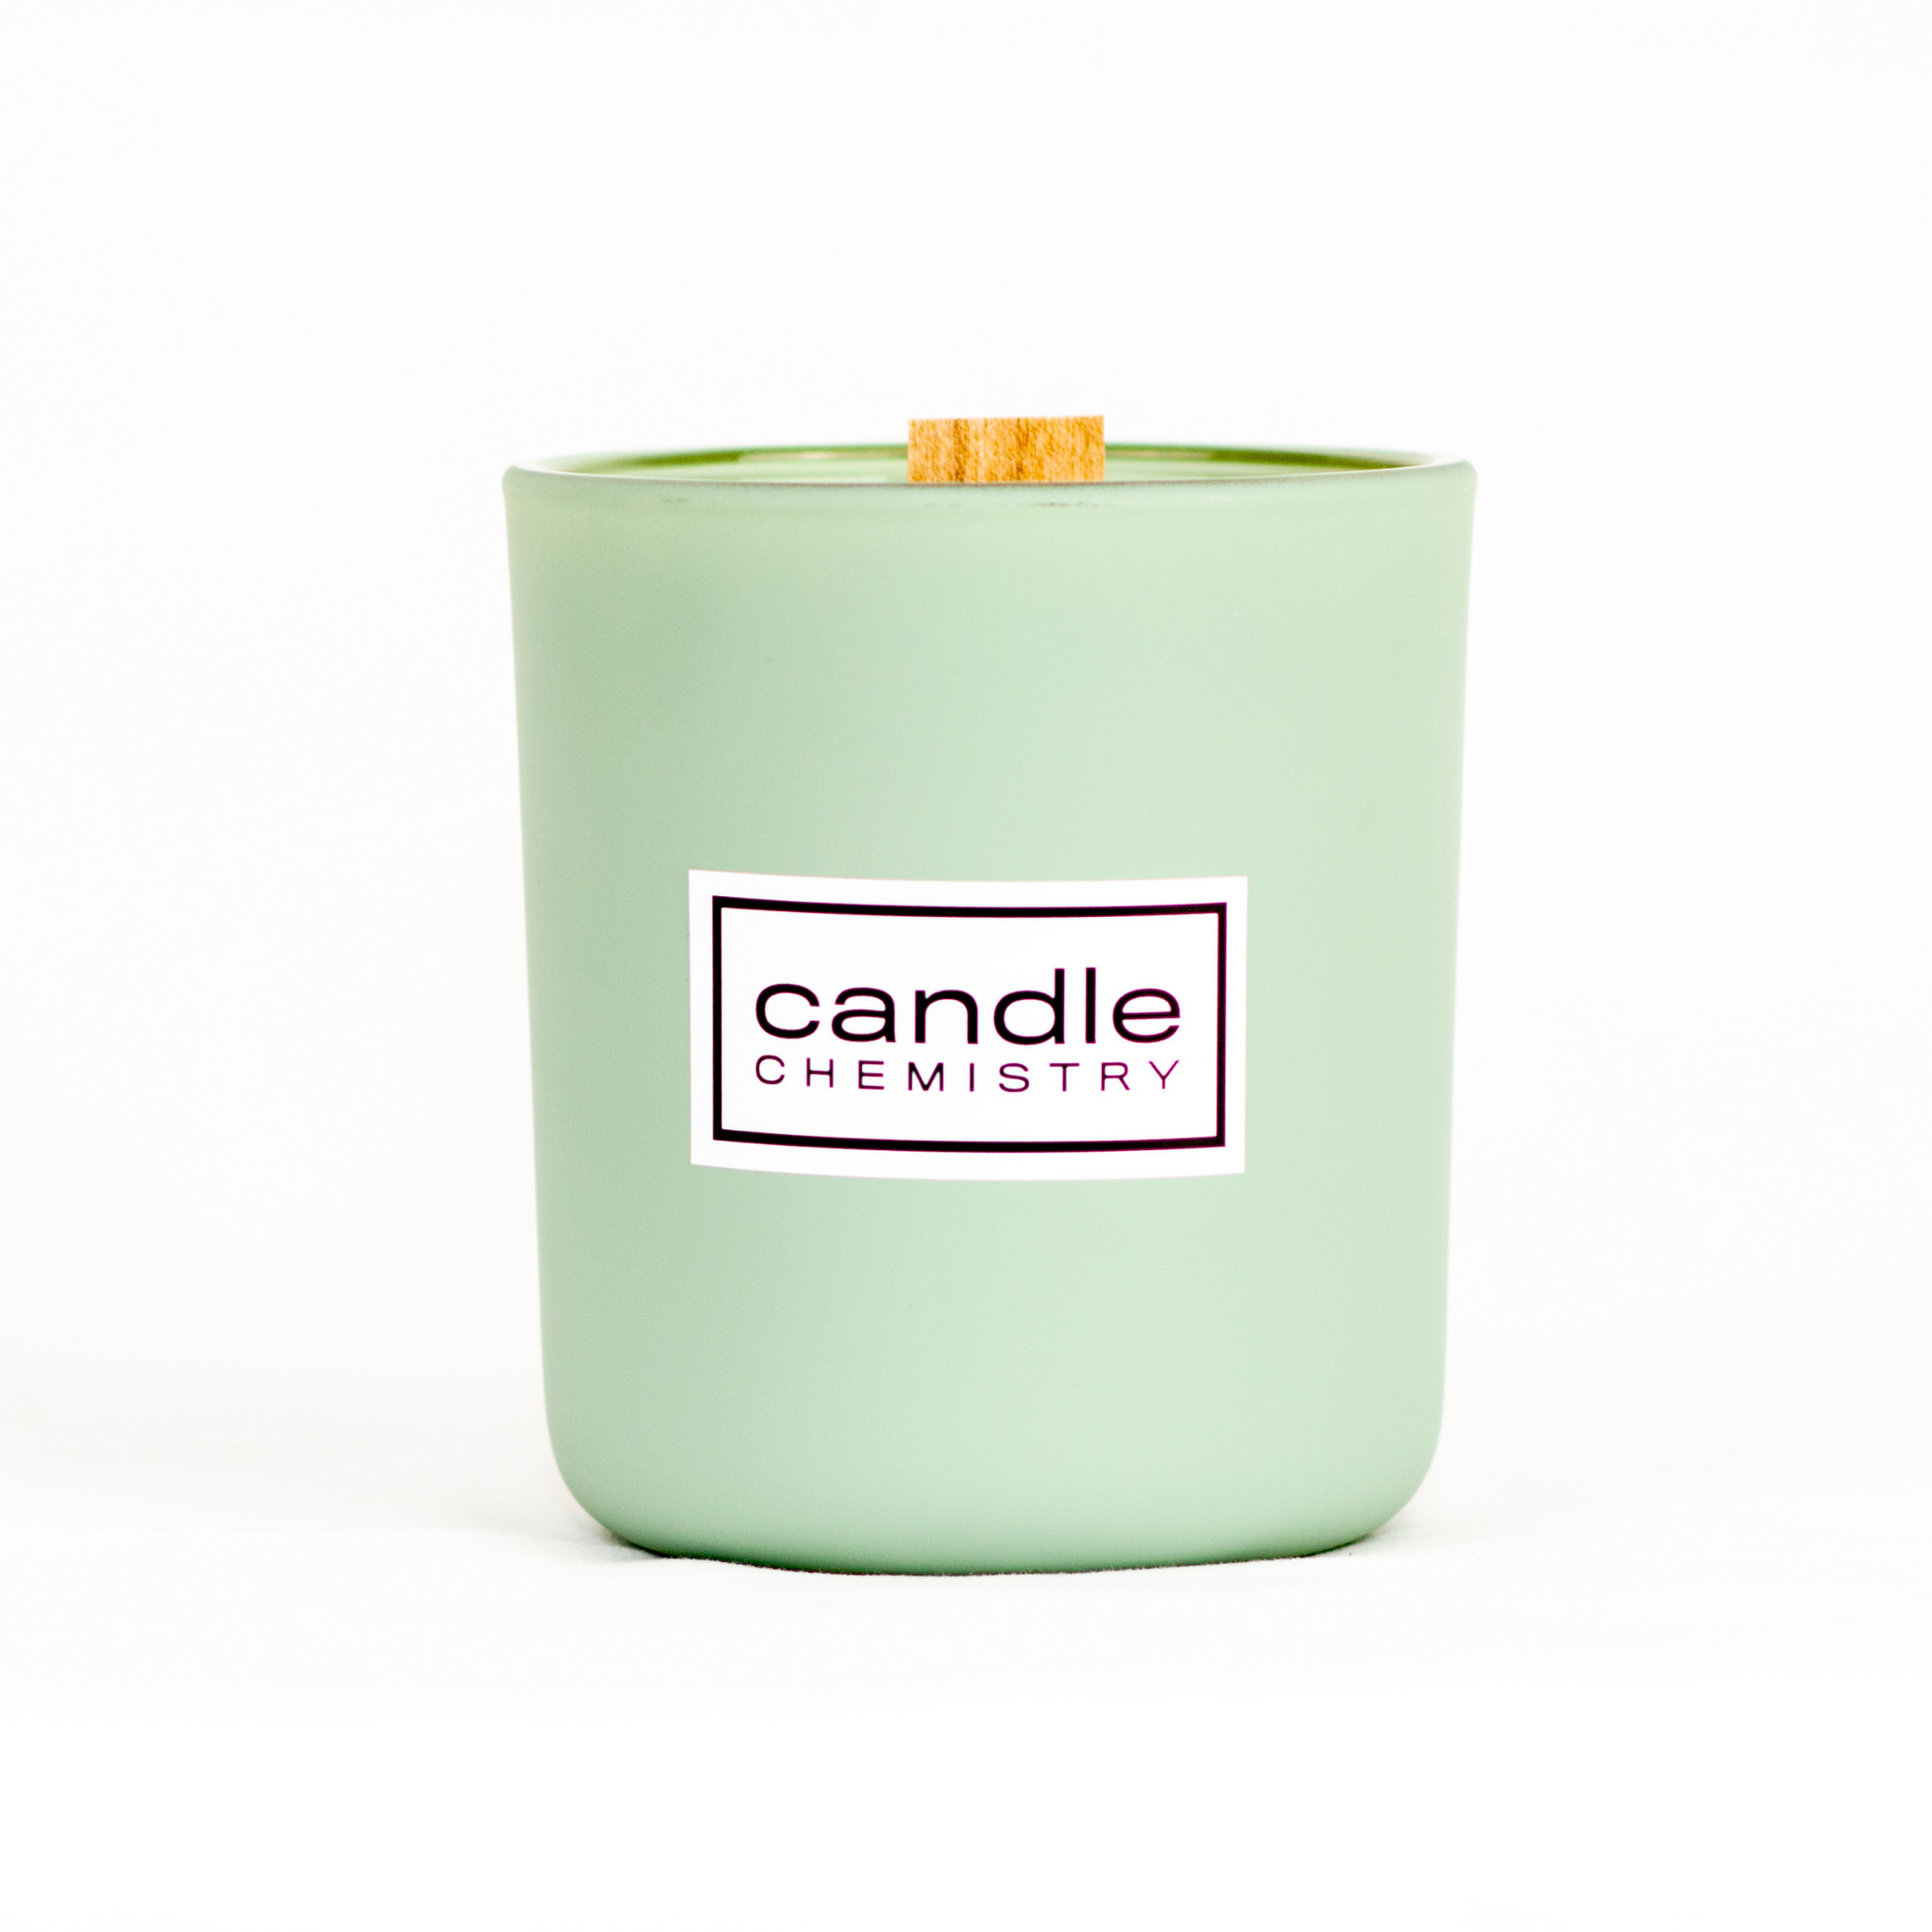 Gardenia (16 oz.) - Large Wood Wick Candle – Mountainside Woodwick Candles